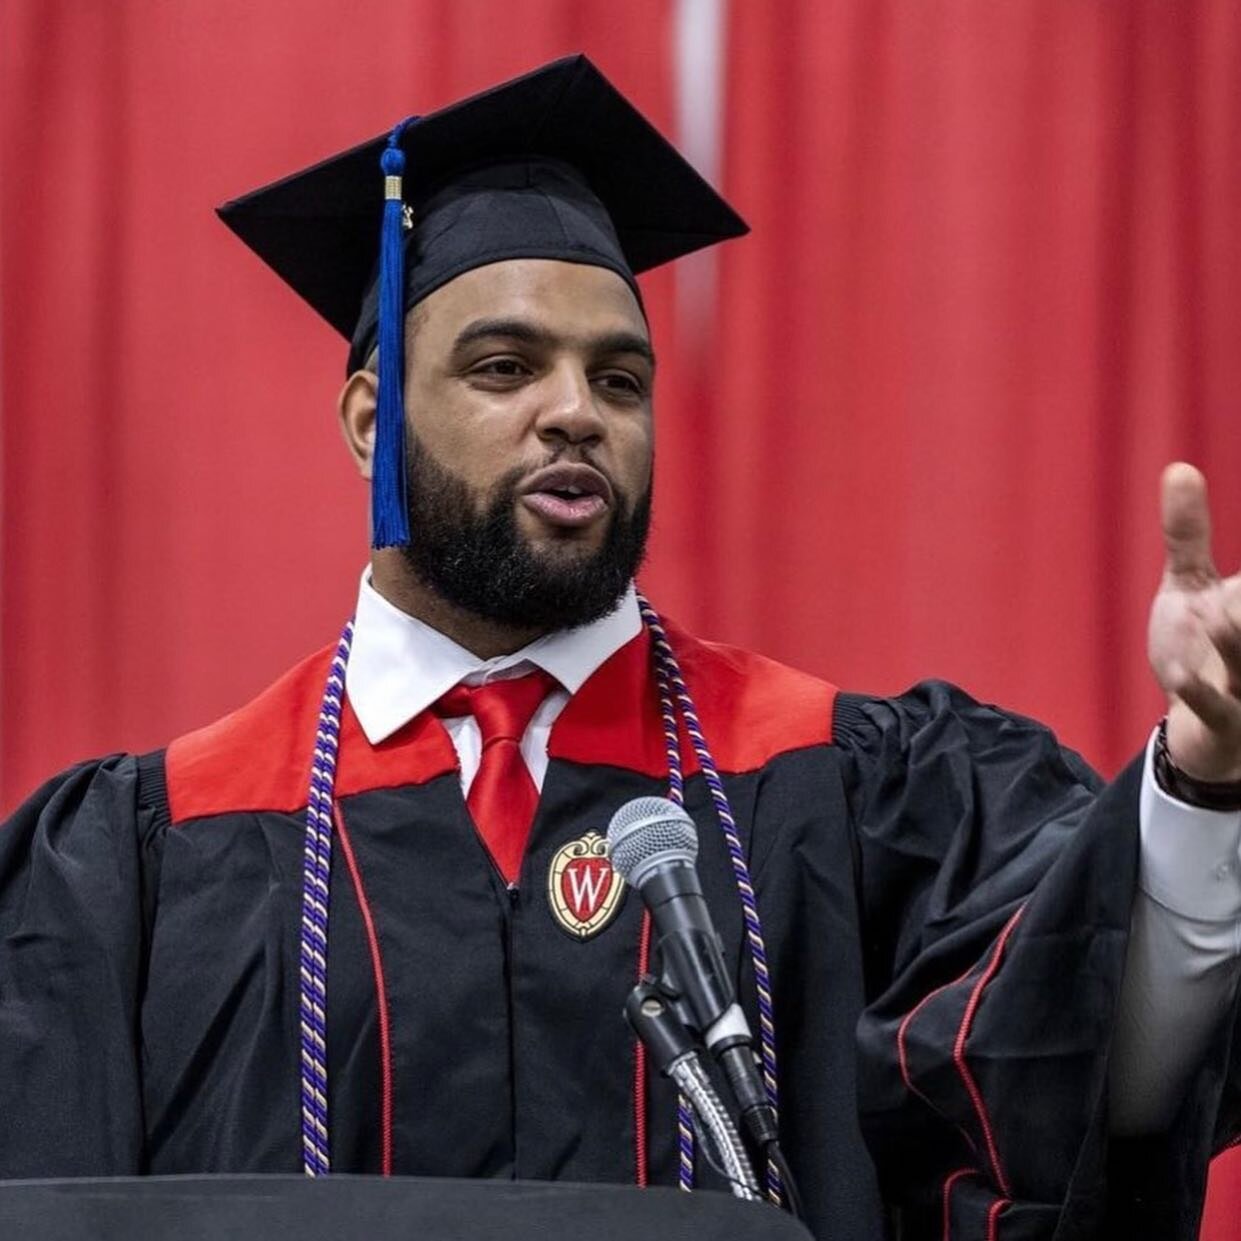 One of our fellow brothers, Bryson Williams, was chosen to be the student speaker at both the BBA Graduation Ceremony and UW&rsquo;s Student Athlete Graduation!!

Bryson has been a brother since Fall 2019 and has also played on the UW football team t